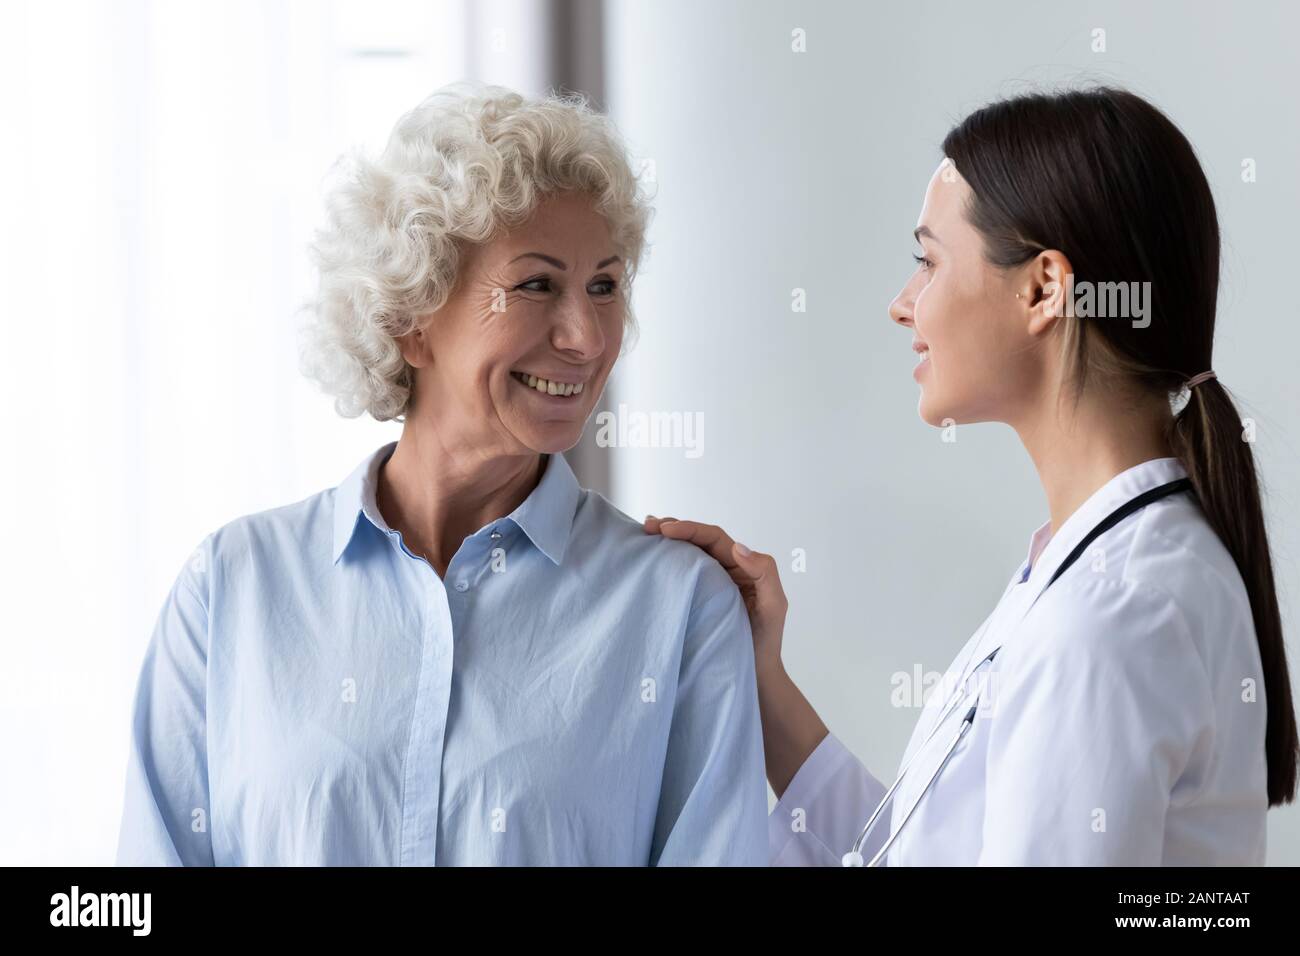 Caring nurse touching smiling older woman shoulder, expressing support Stock Photo